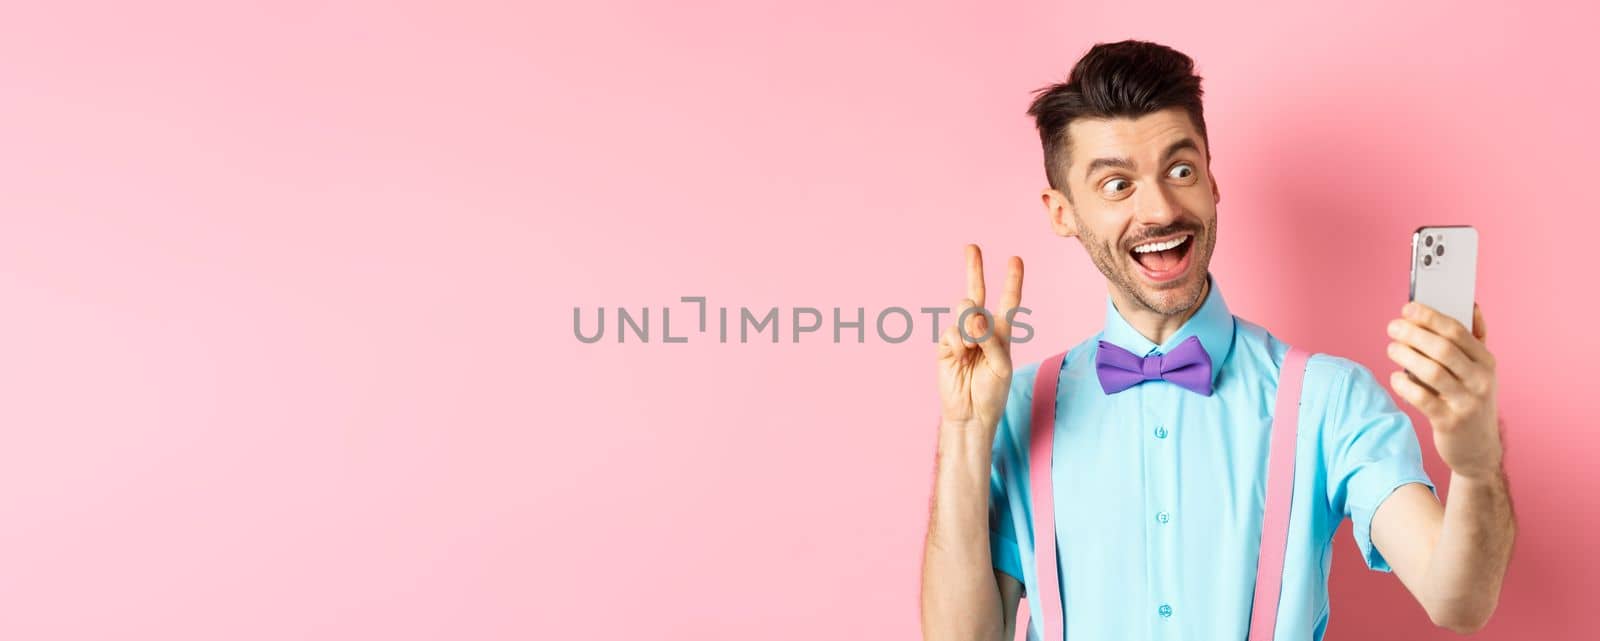 Technology concept. Funny man with moustache and bow-tie taking selfie on smartphone, showing peace sign and smiling at mobile camera, pink background.